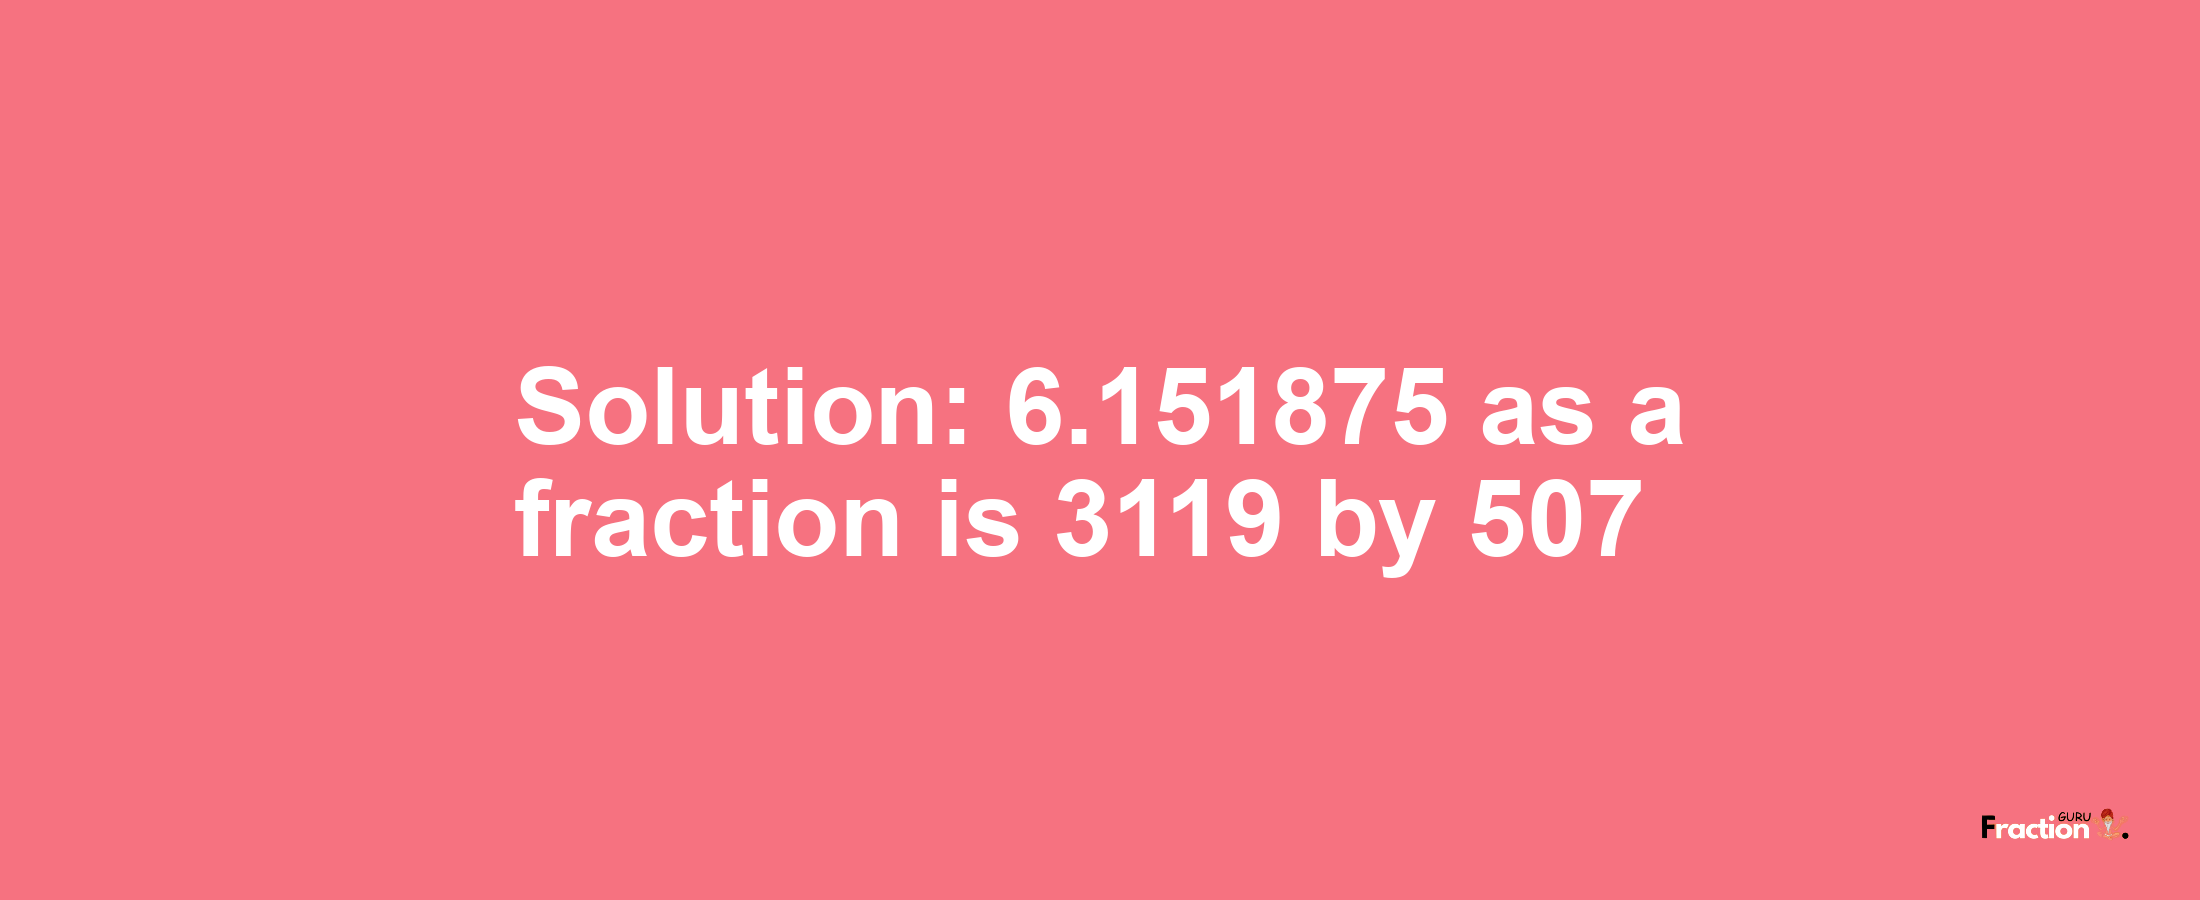 Solution:6.151875 as a fraction is 3119/507